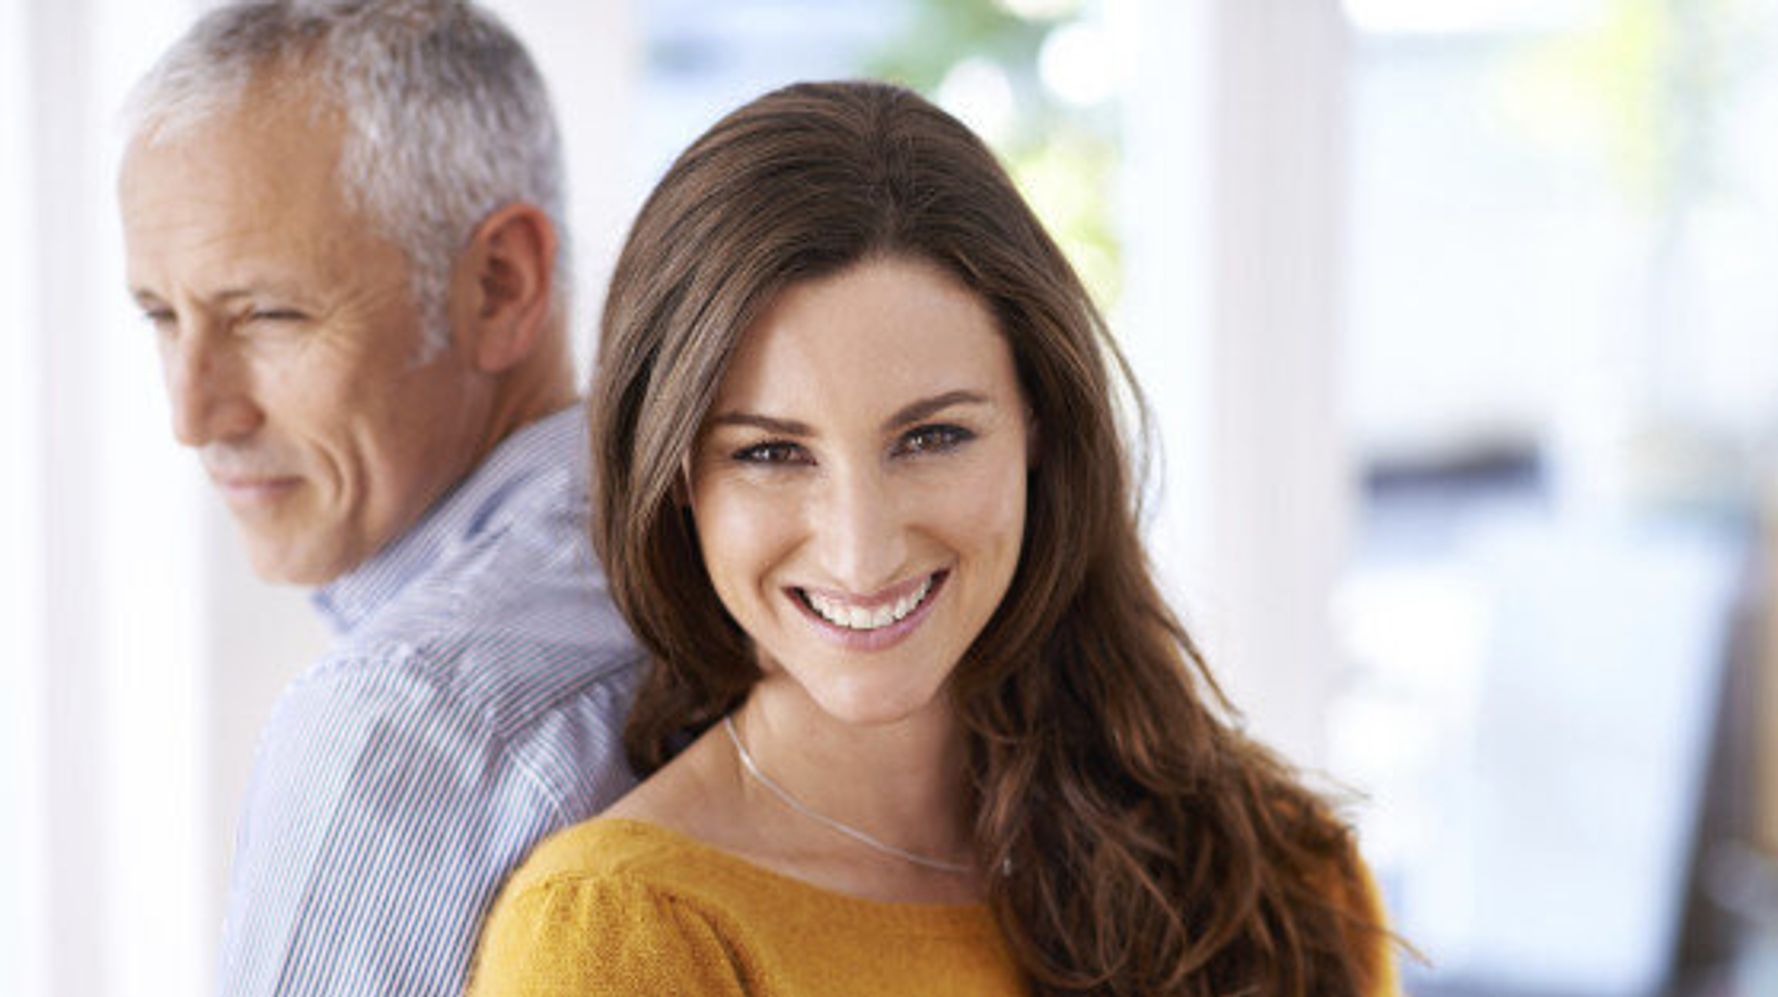 age difference dating,dating,dating advice,dating an older man,living...